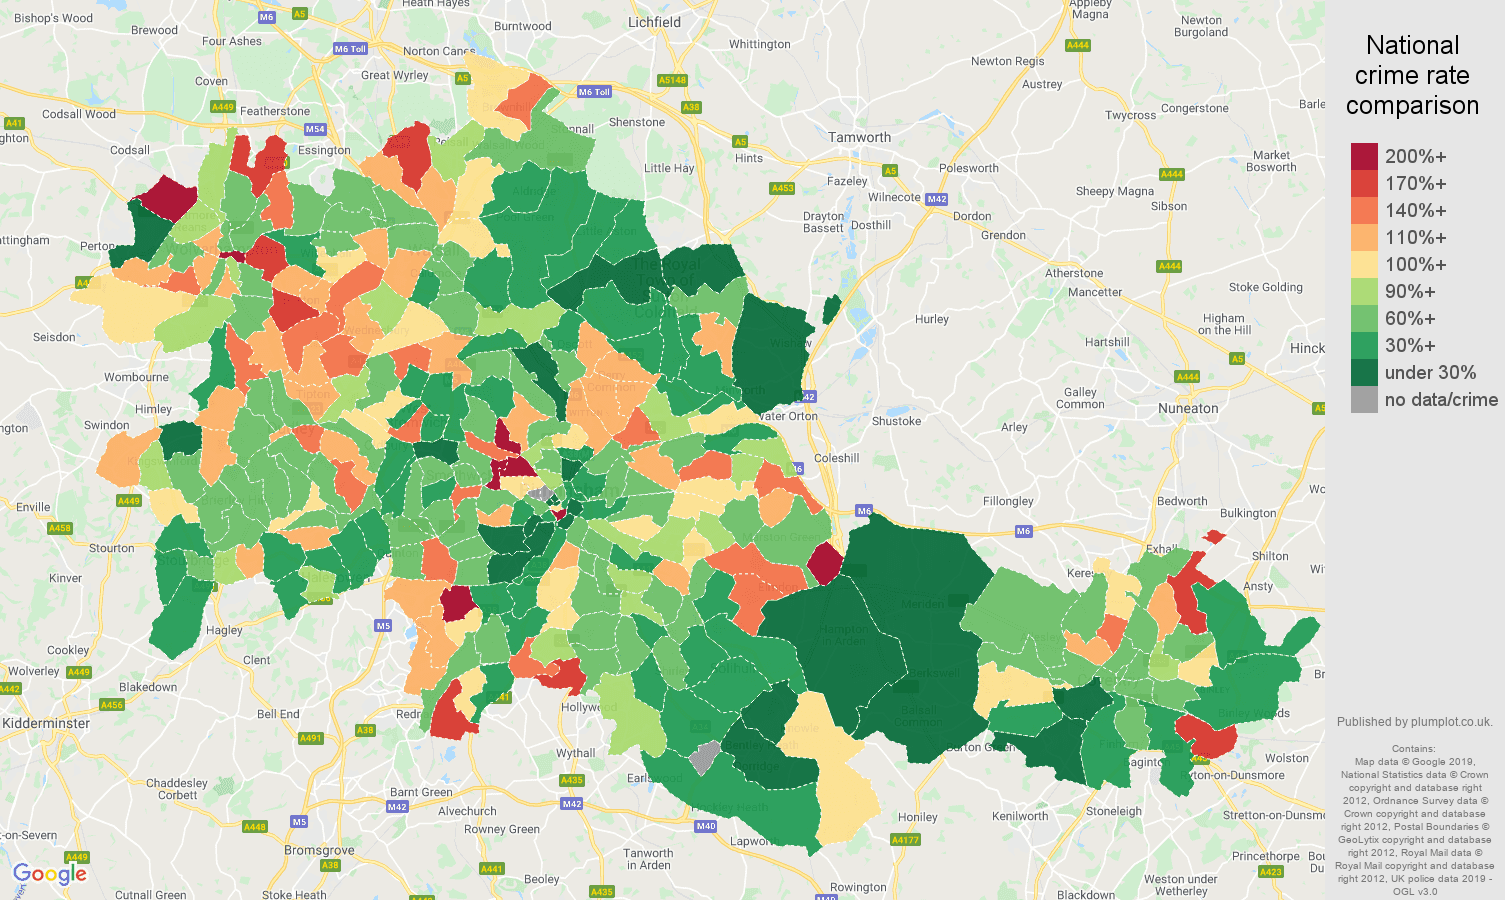 West Midlands county other crime rate comparison map